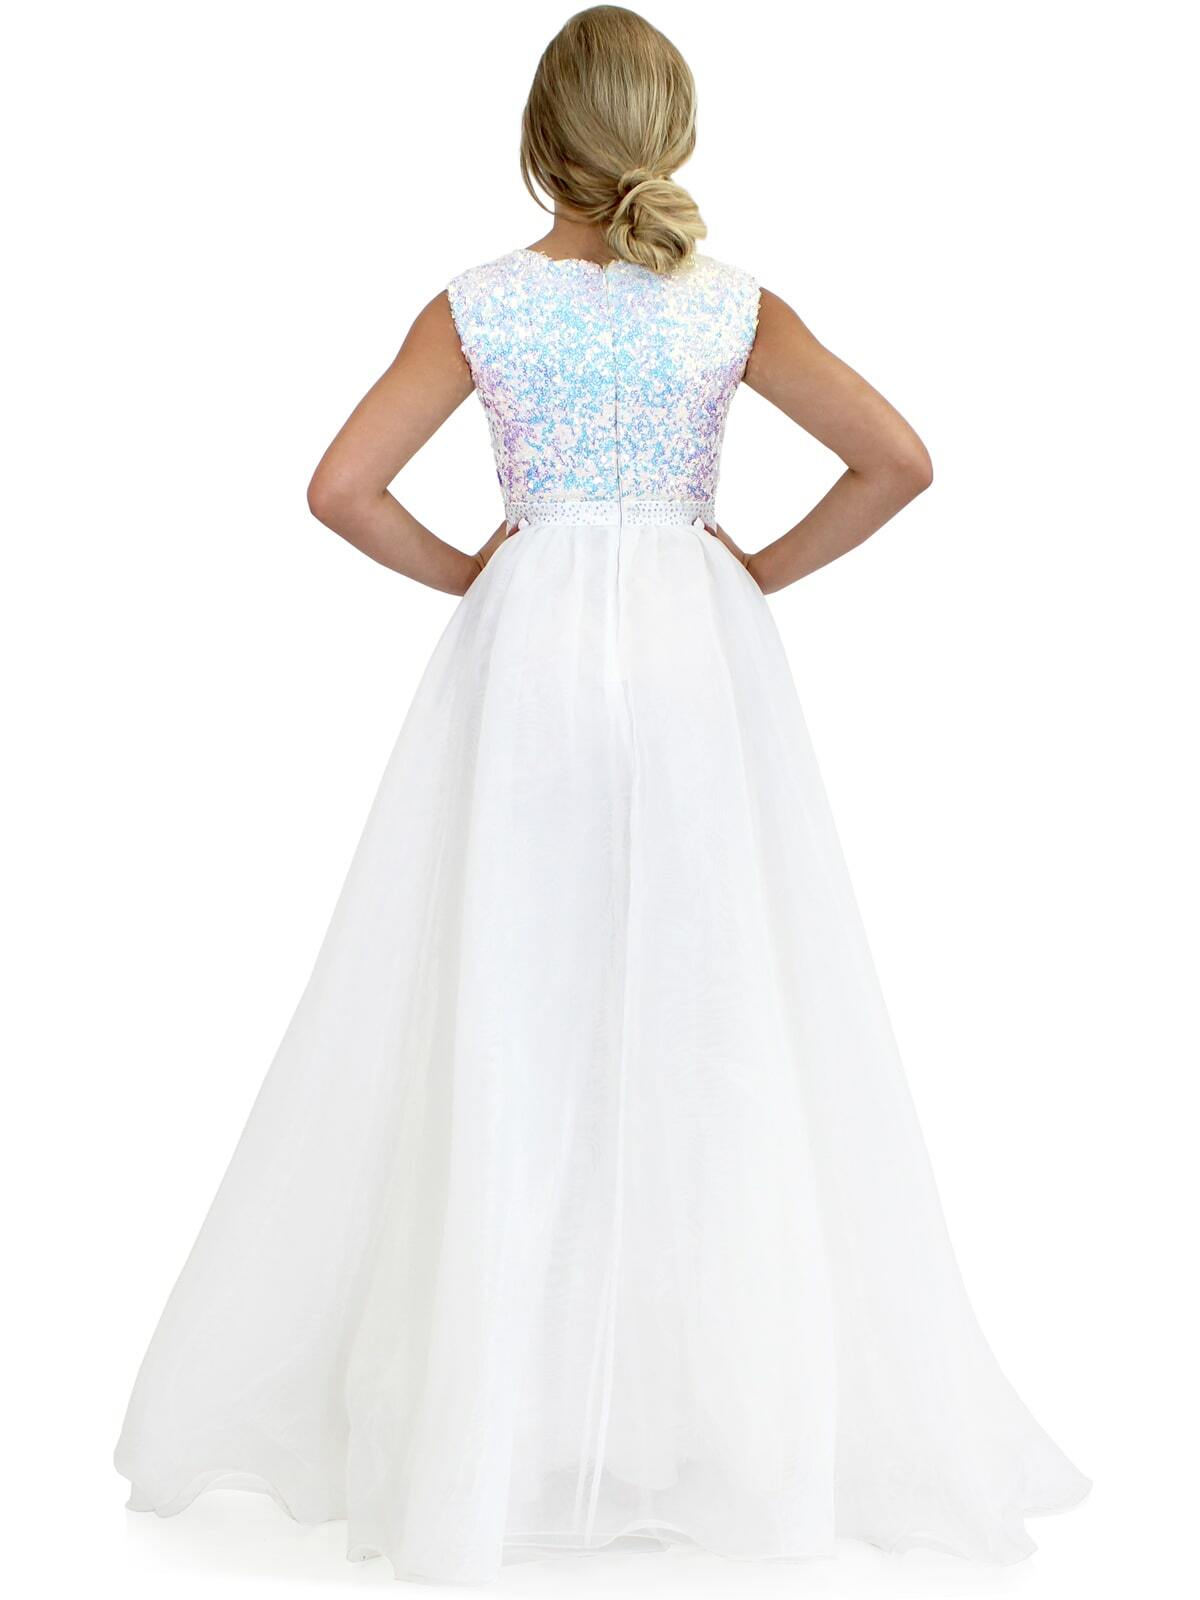 Marc Defang 5009 Long A Line Sequin Girls Ball Gown Pageant Dress Chiffon Kids  A classic classy perfect evening gown! Scallop shape necklines  Fully beaded top Hand crafted AB Crystals on the waistband  Organza skirt Center back invisible zippers  Fully lined  Available Sizes: 4-14  Available Colors: Royal Blue, Mint, White, Red  IF NOT IN STOCK PLEASE ALLOW 30 DAYS FOR DELIVERY!